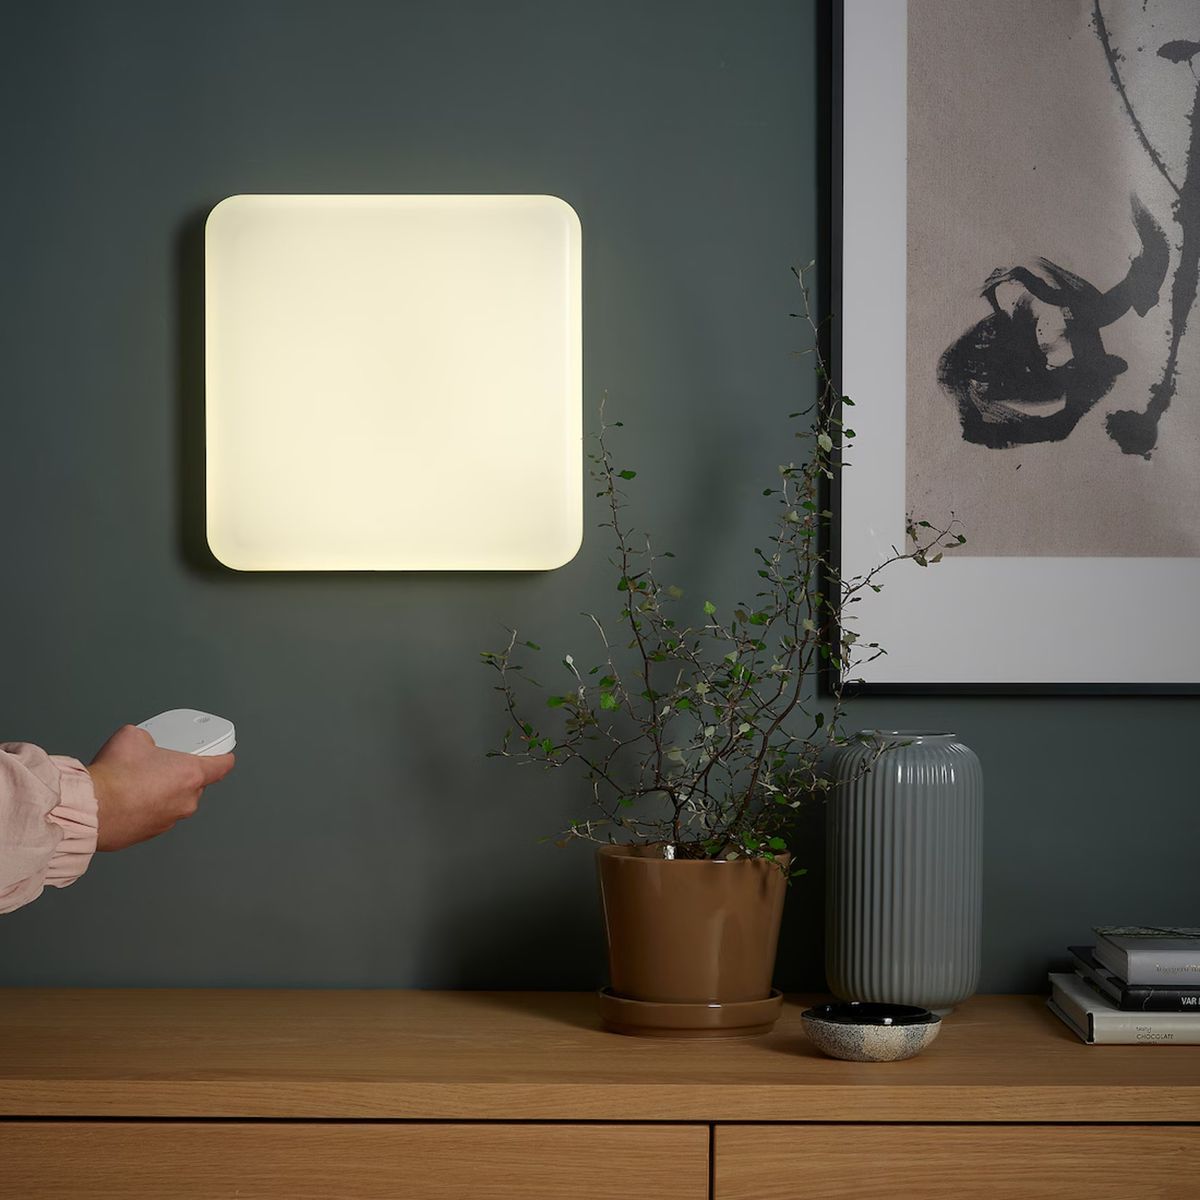 IKEA has just launched a new smart lamp to change how we light our homes